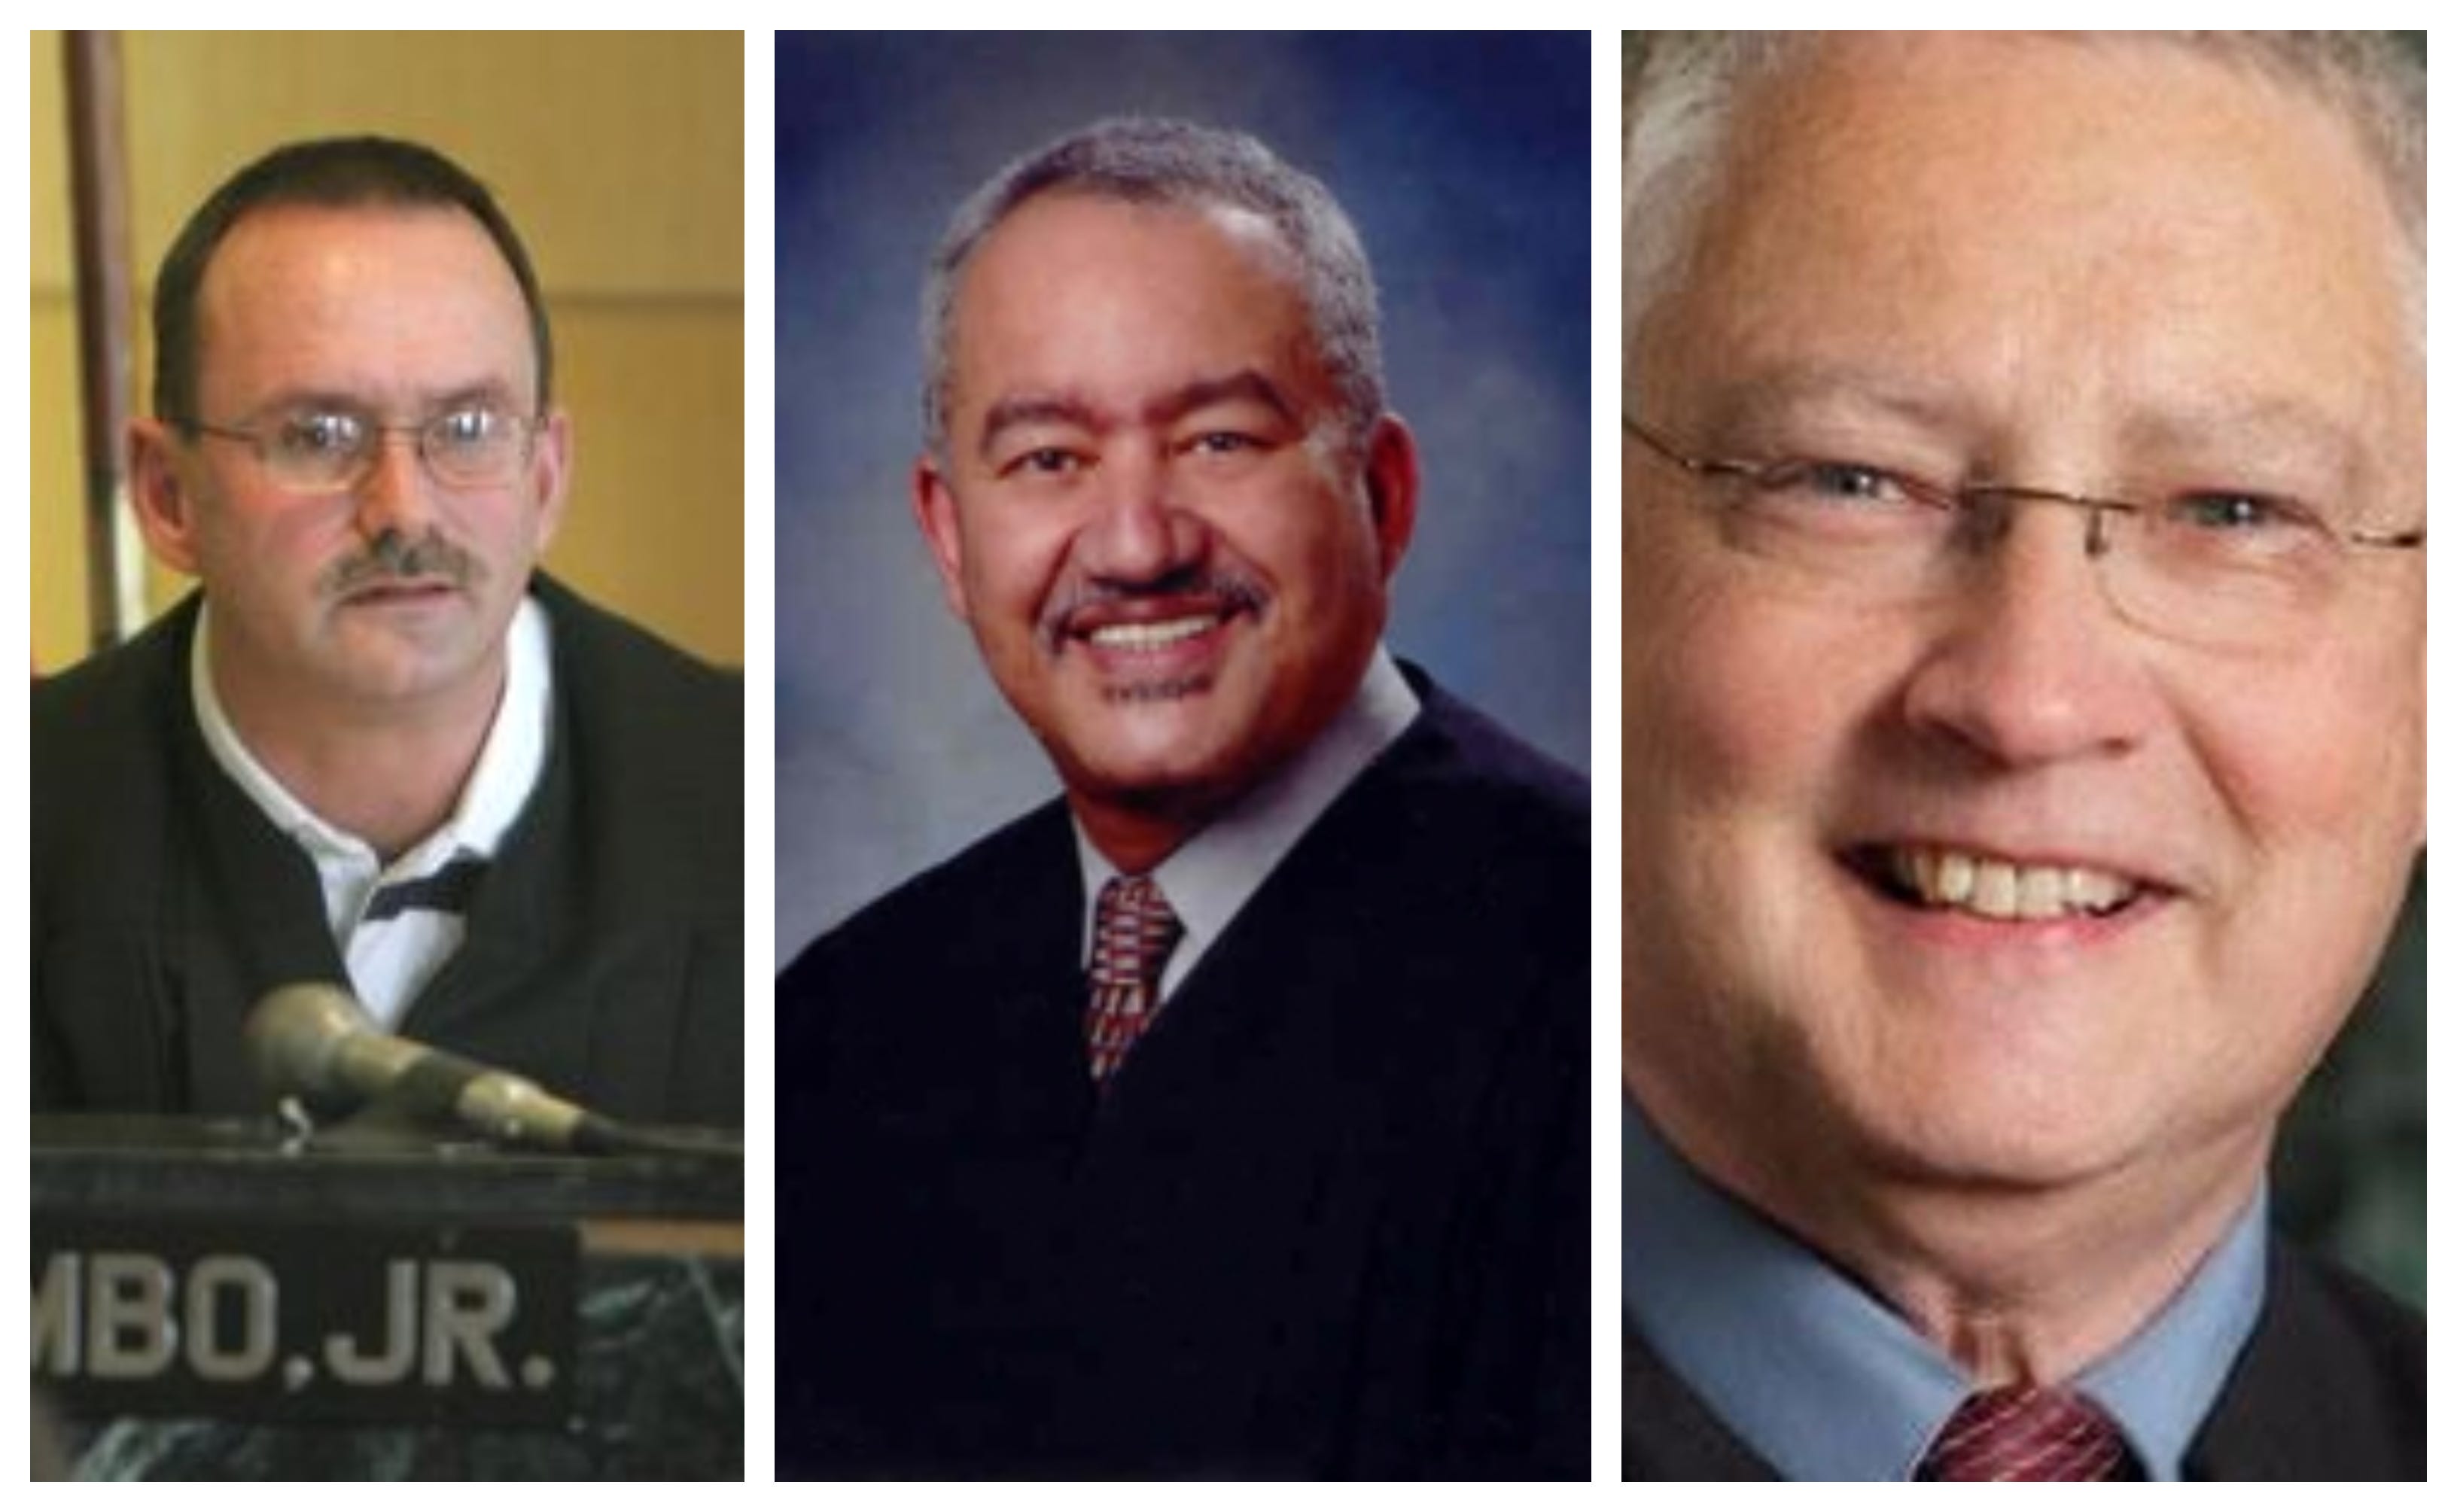 Chief Judge Robert J. Colombo Jr., Judge and former Chief Judge Virgil C. Smith, and Judge Richard B. Halloran will be hanging up the robes at the end of December.